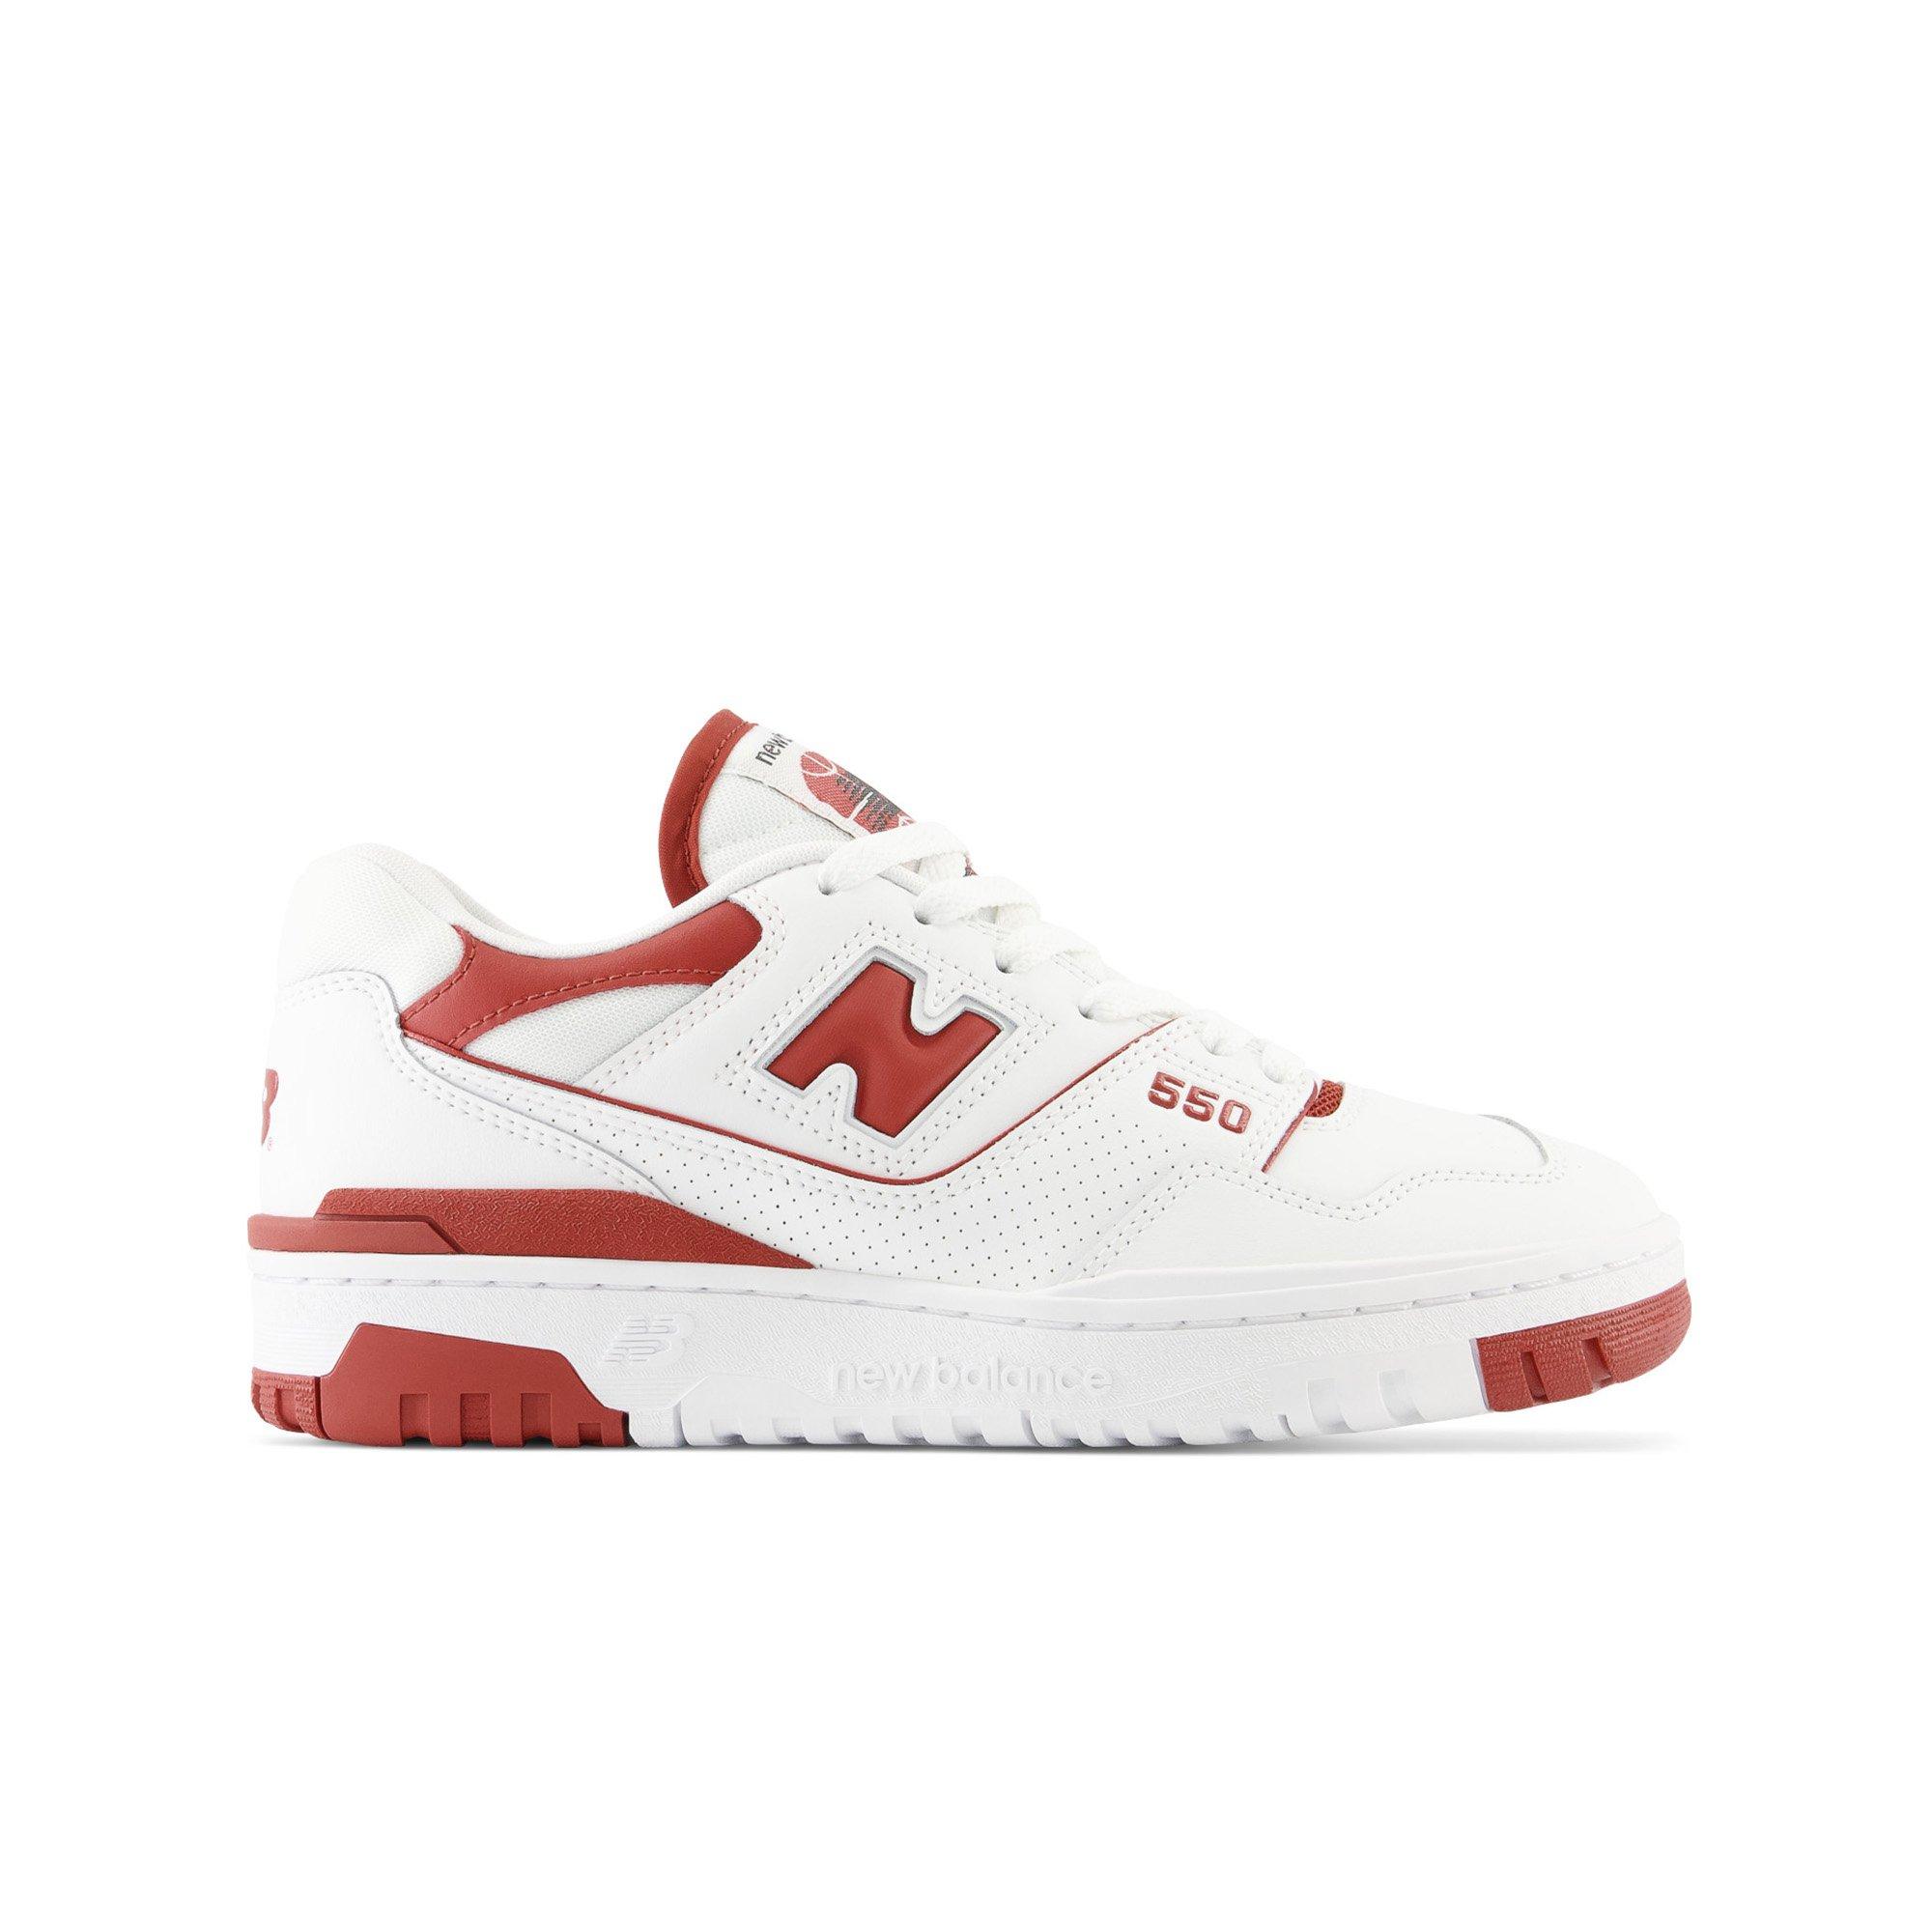 Women's New Balance 550 “Brick Red” now available online & in store! 🧱 👟